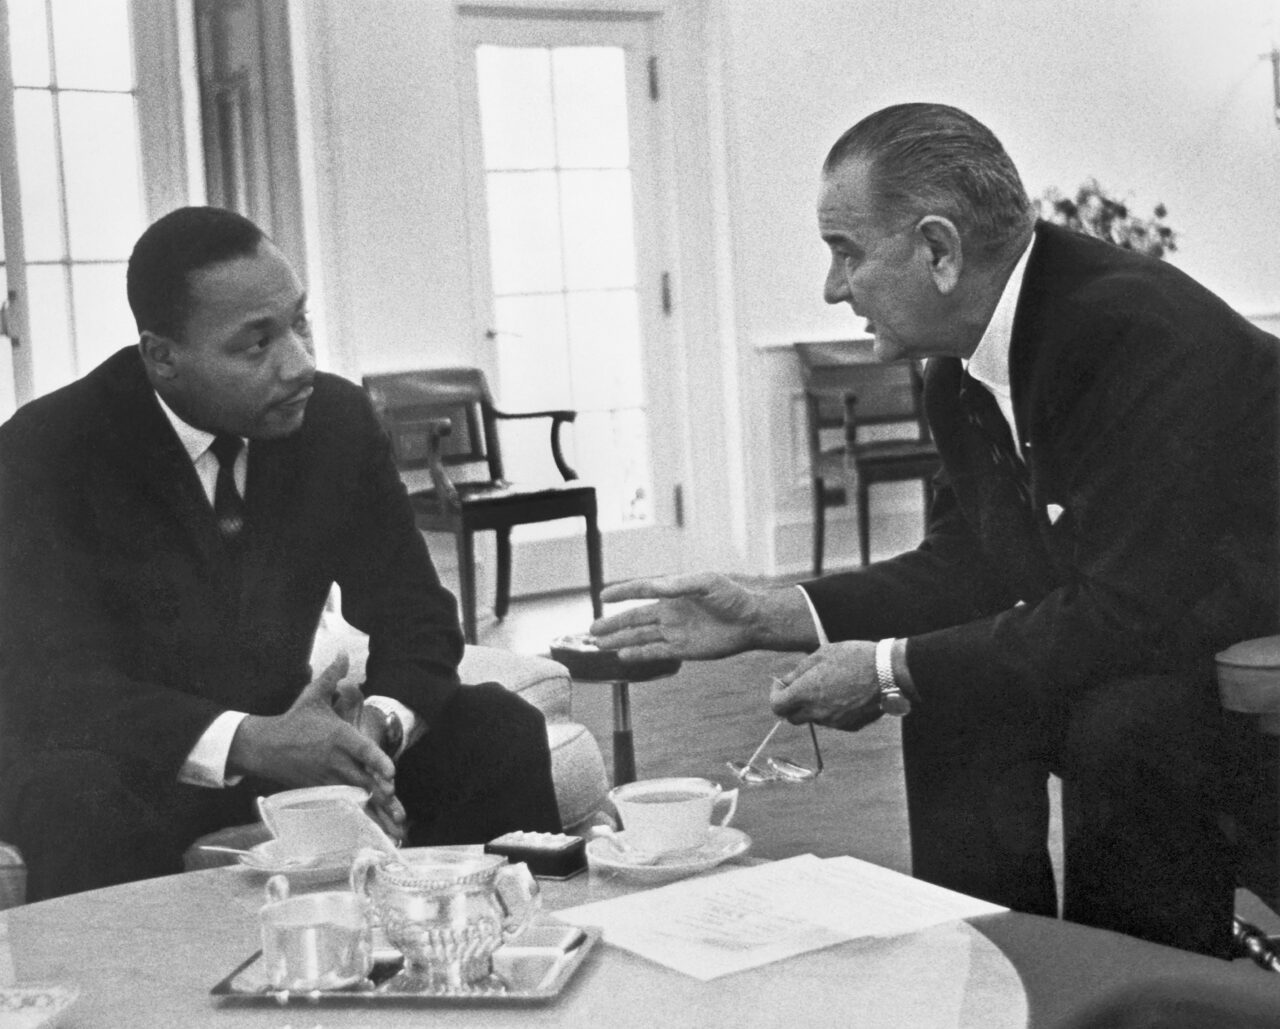 Martin Luther King Jr. meets with President Johnson at the White House.